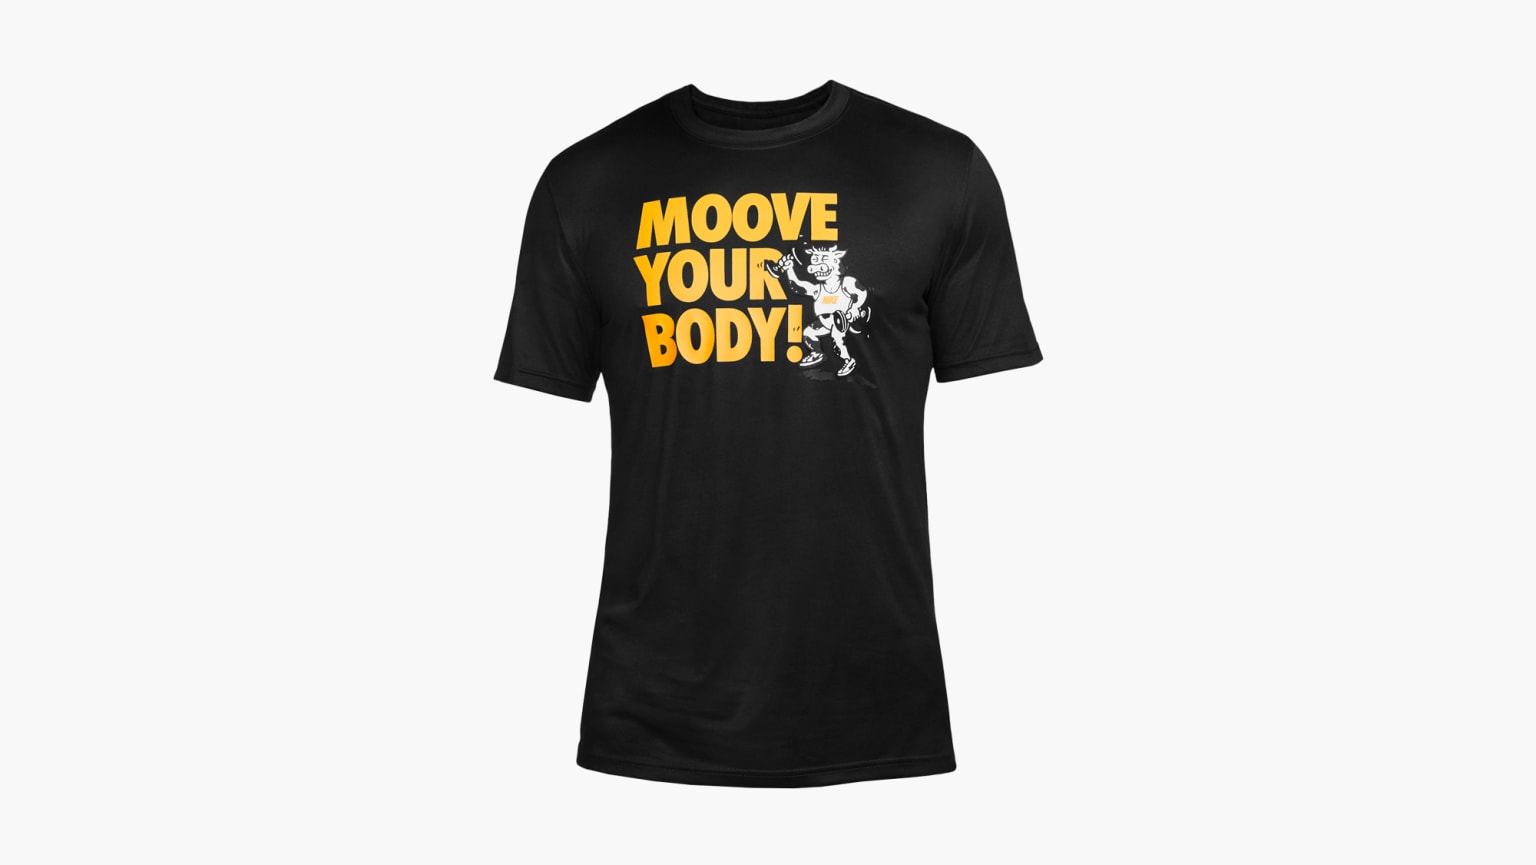 Nike Dri-FIT “Moove Your Body” Training Tee - Men's - Black | Rogue Fitness